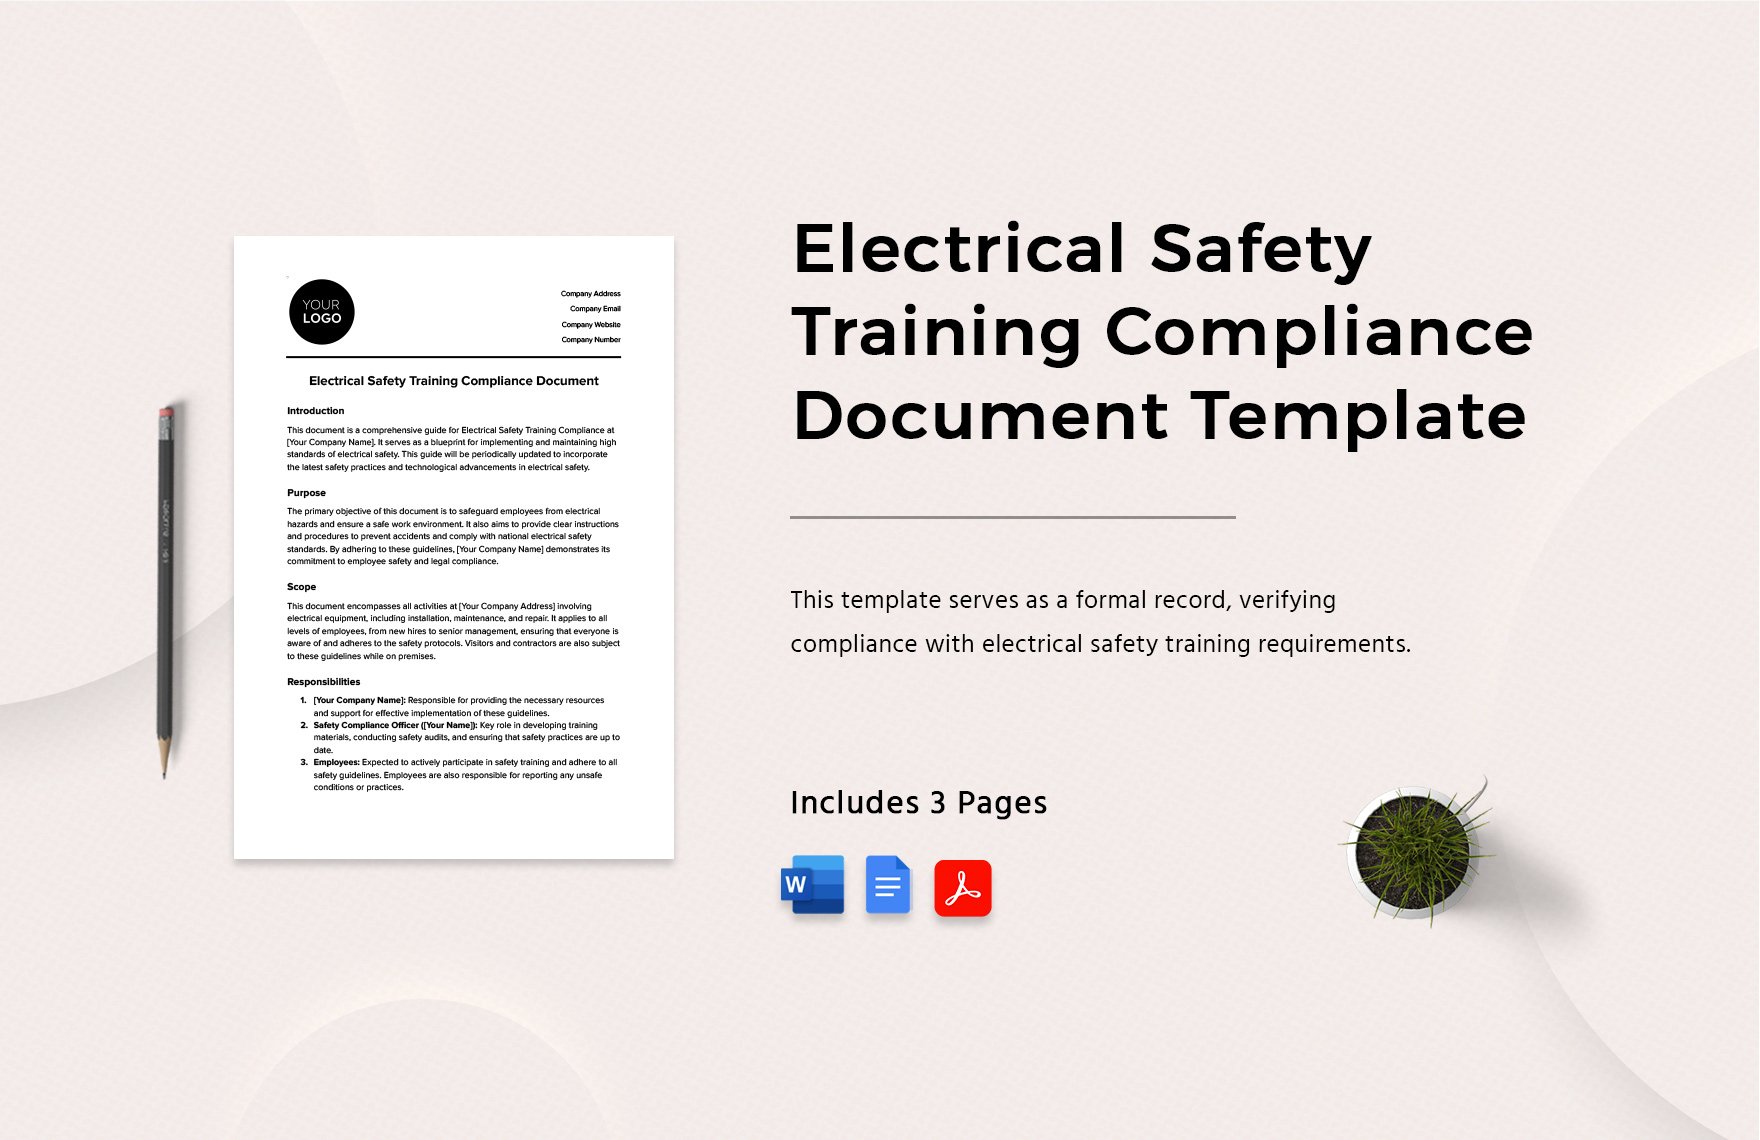 Electrical Safety Training Compliance Document Template in Word, Google Docs, PDF